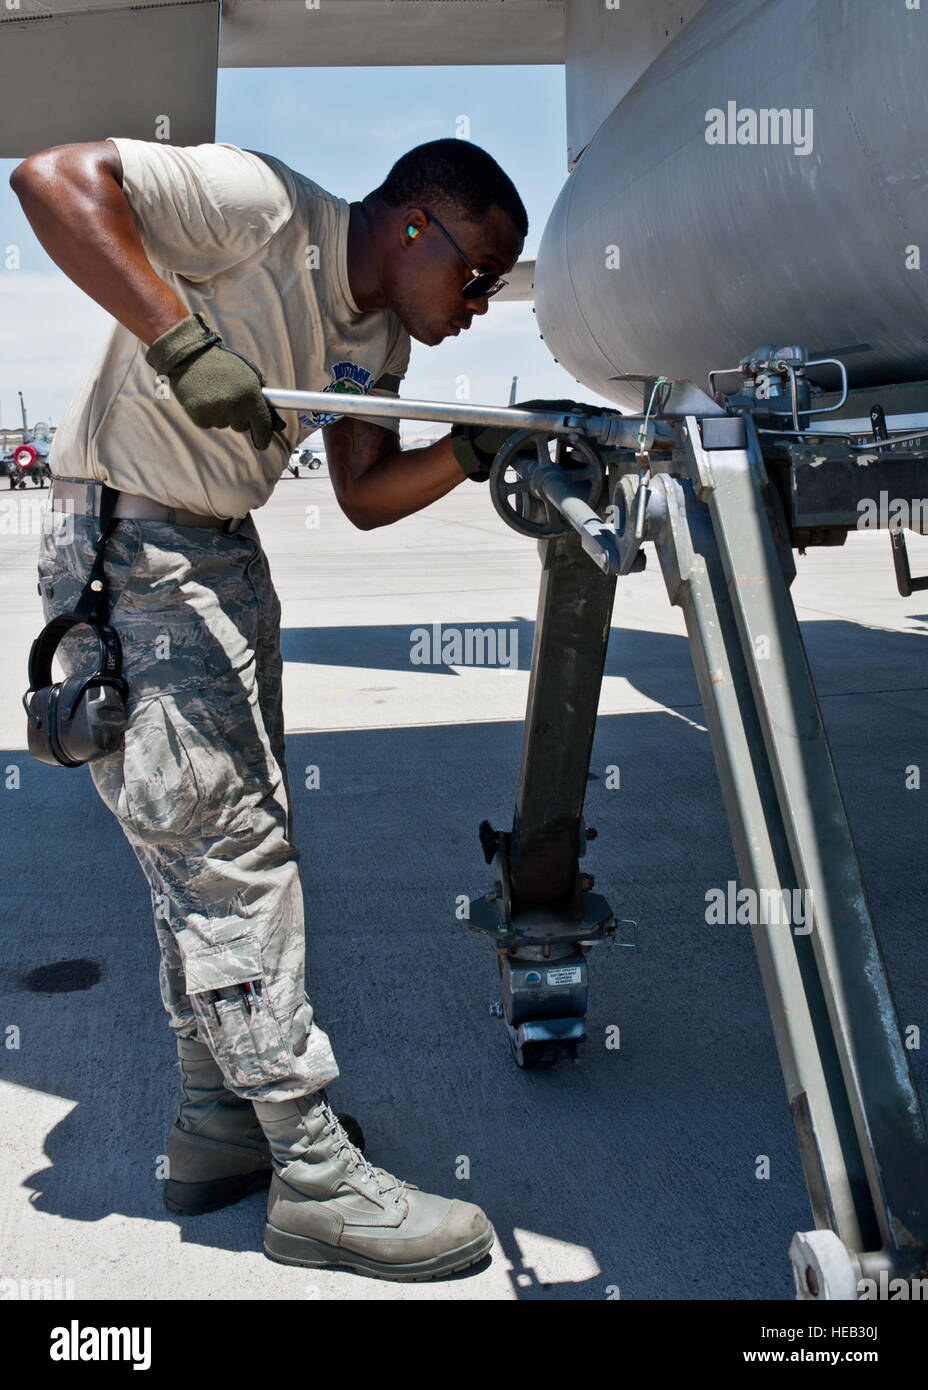 Senior Airman Quenton Richardson, 159th Maintenance Squadron crew chief, Louisiana Air National Guard, removes an external fuel tank on an F-15 Eagle during Red Flag 15-3 at Nellis Air Force Base, Nev., July 14, 2015. Crew chiefs are responsible for overseeing the day-to-day maintenance of aircraft including diagnosing malfunctions and replacing components to ensure the aircraft functions properly.  Airman 1st Class Jake Carter) Stock Photo